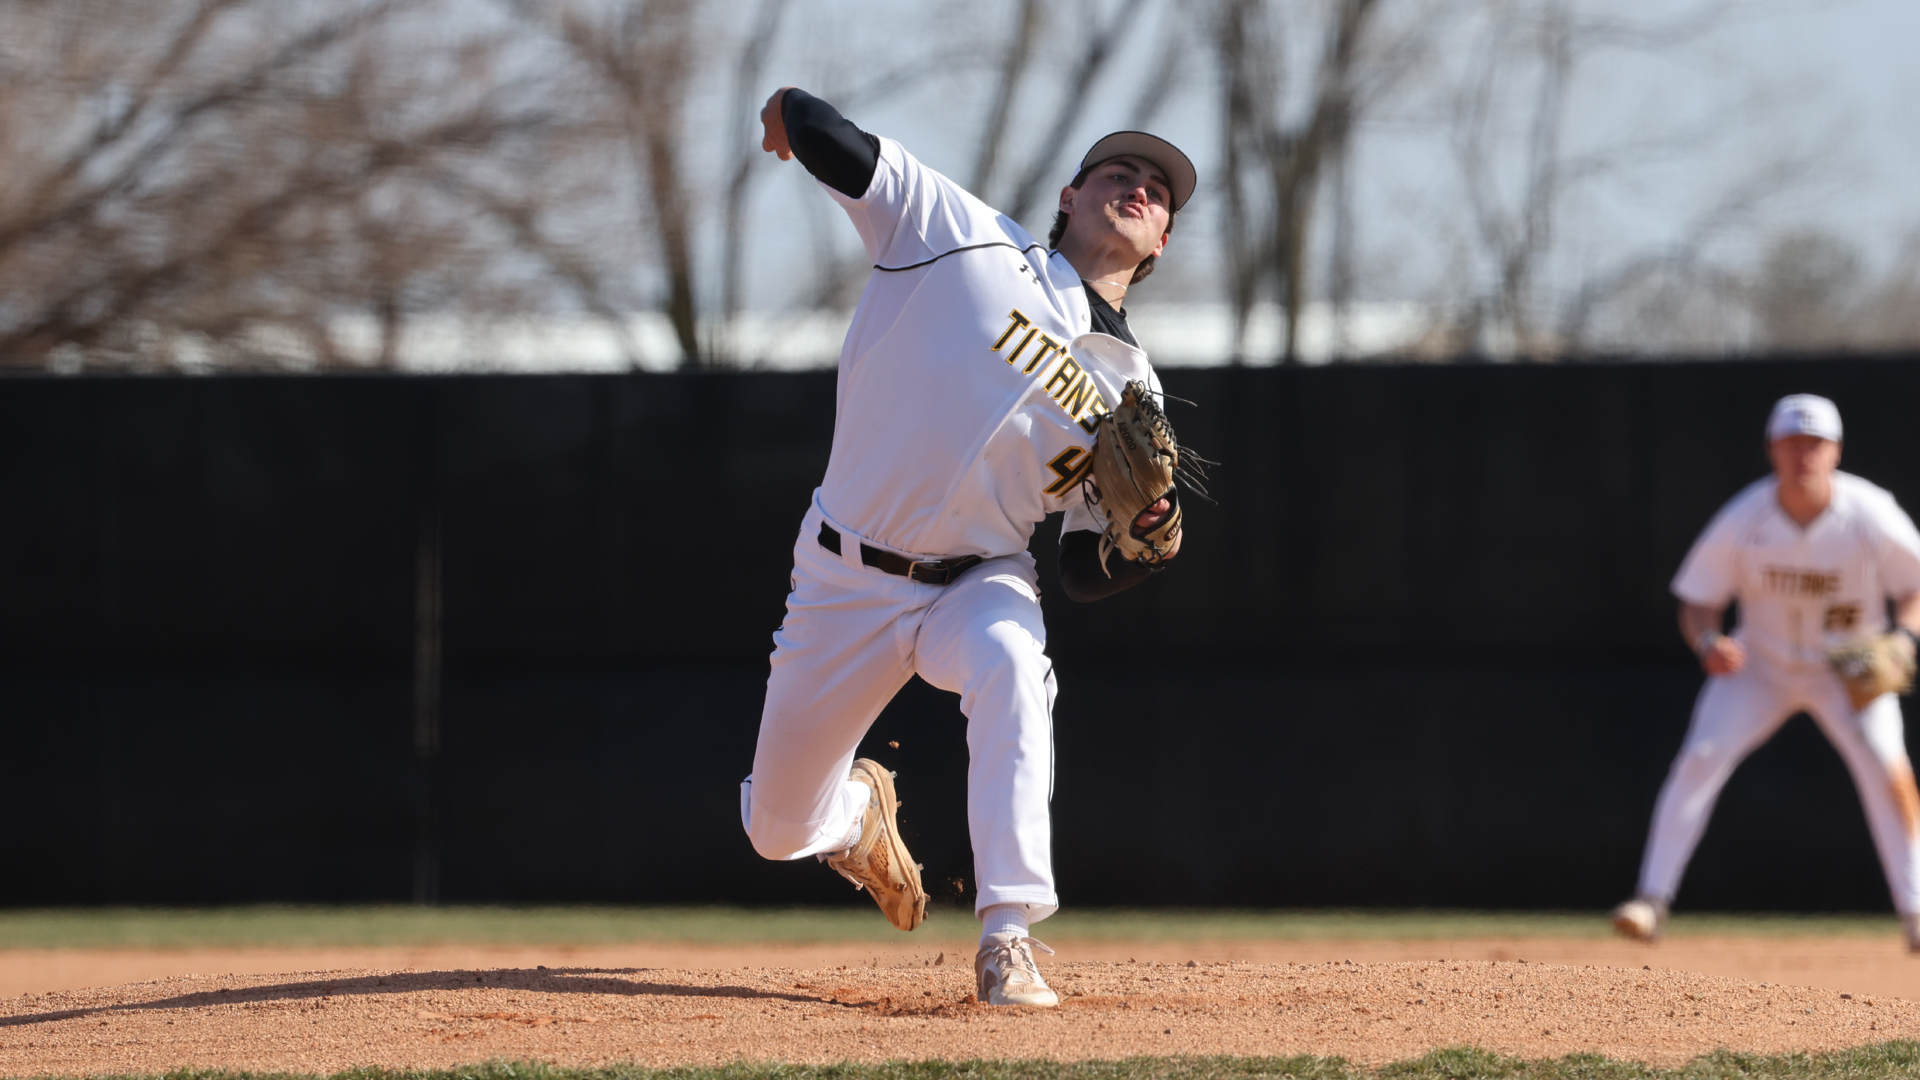 Connor Walters struck out five across 4.0 innings against Lakeland on Saturday. Photo Credit: Steve Frommell, UW-Oshkosh Sports Information